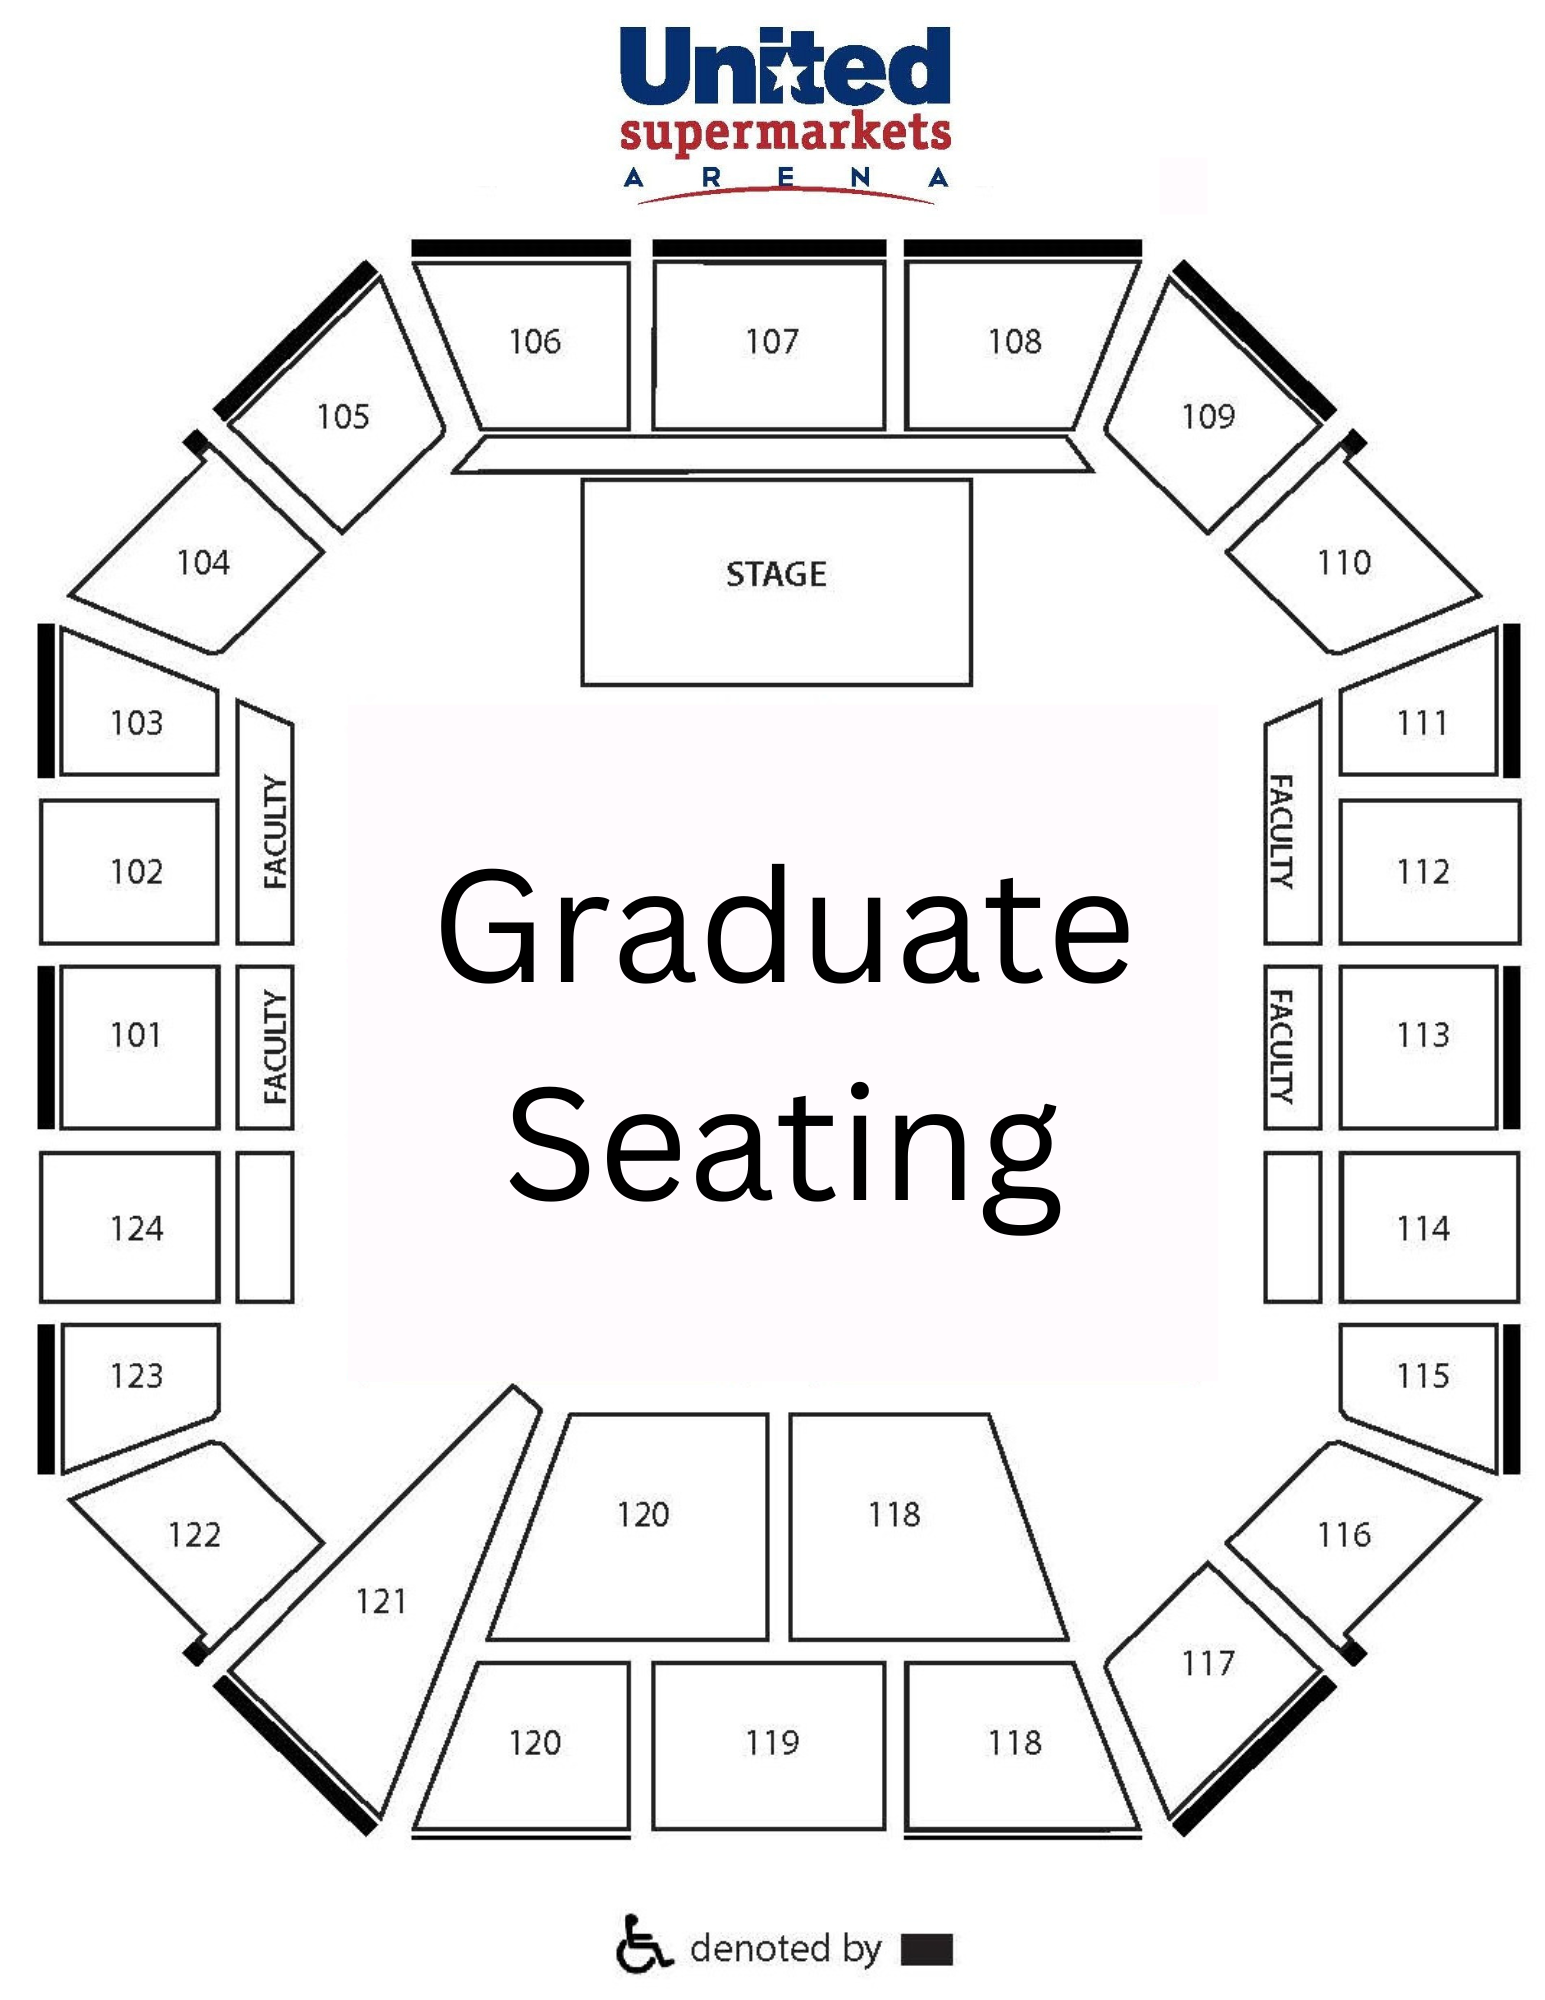 A seating map for the commencement ceremony